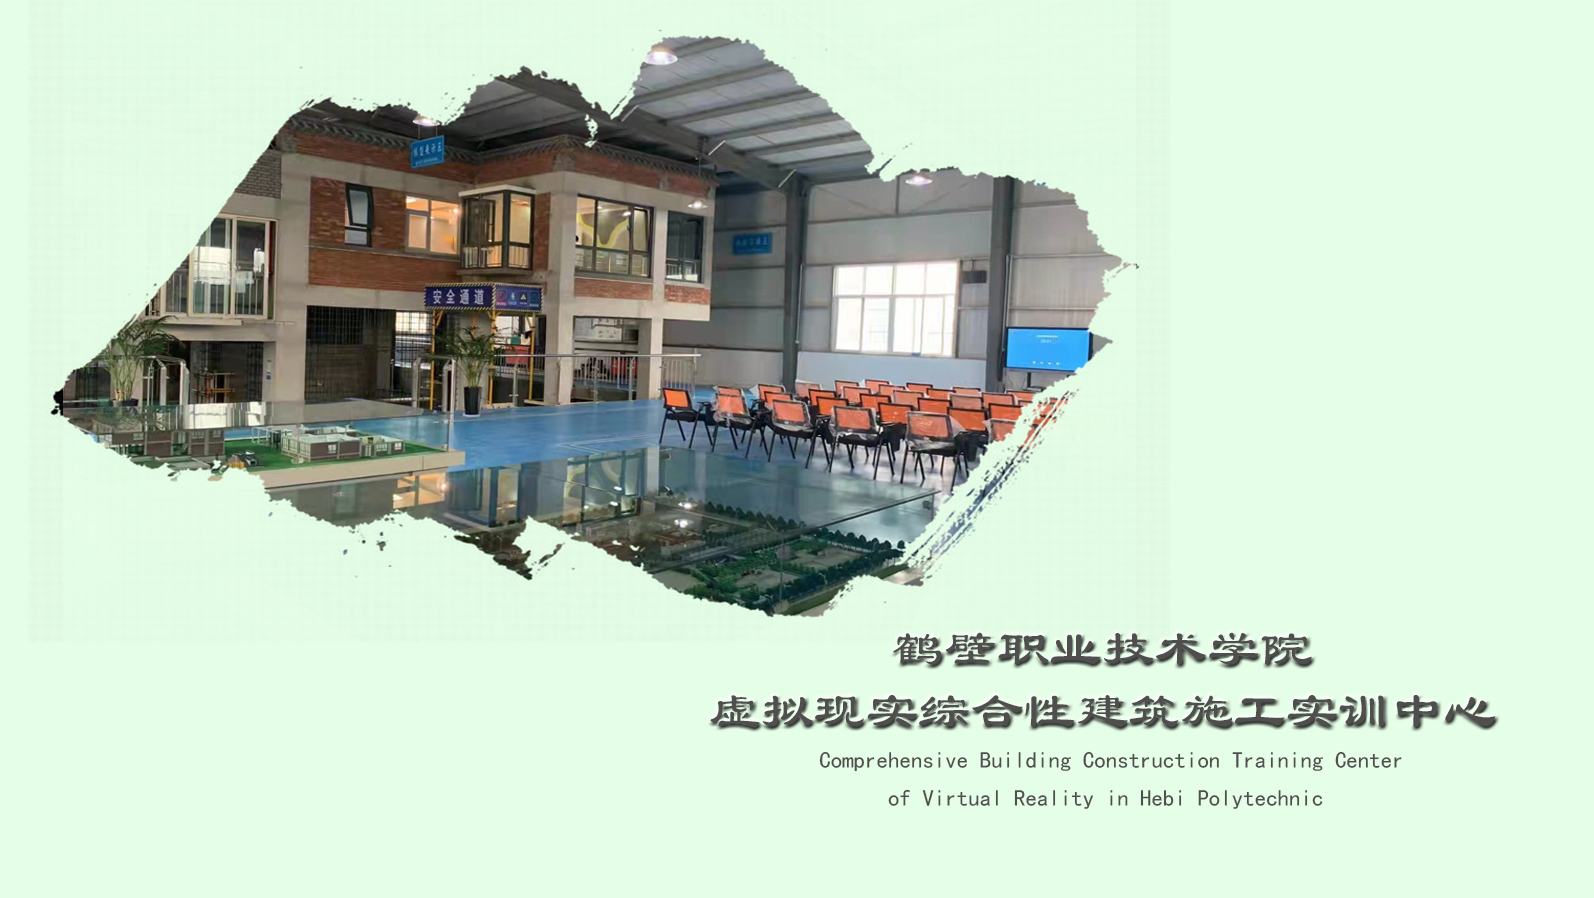 Online Visit of Comprehensive Building Construction Training Center of Virtual Reality in Hebi Polytechnic